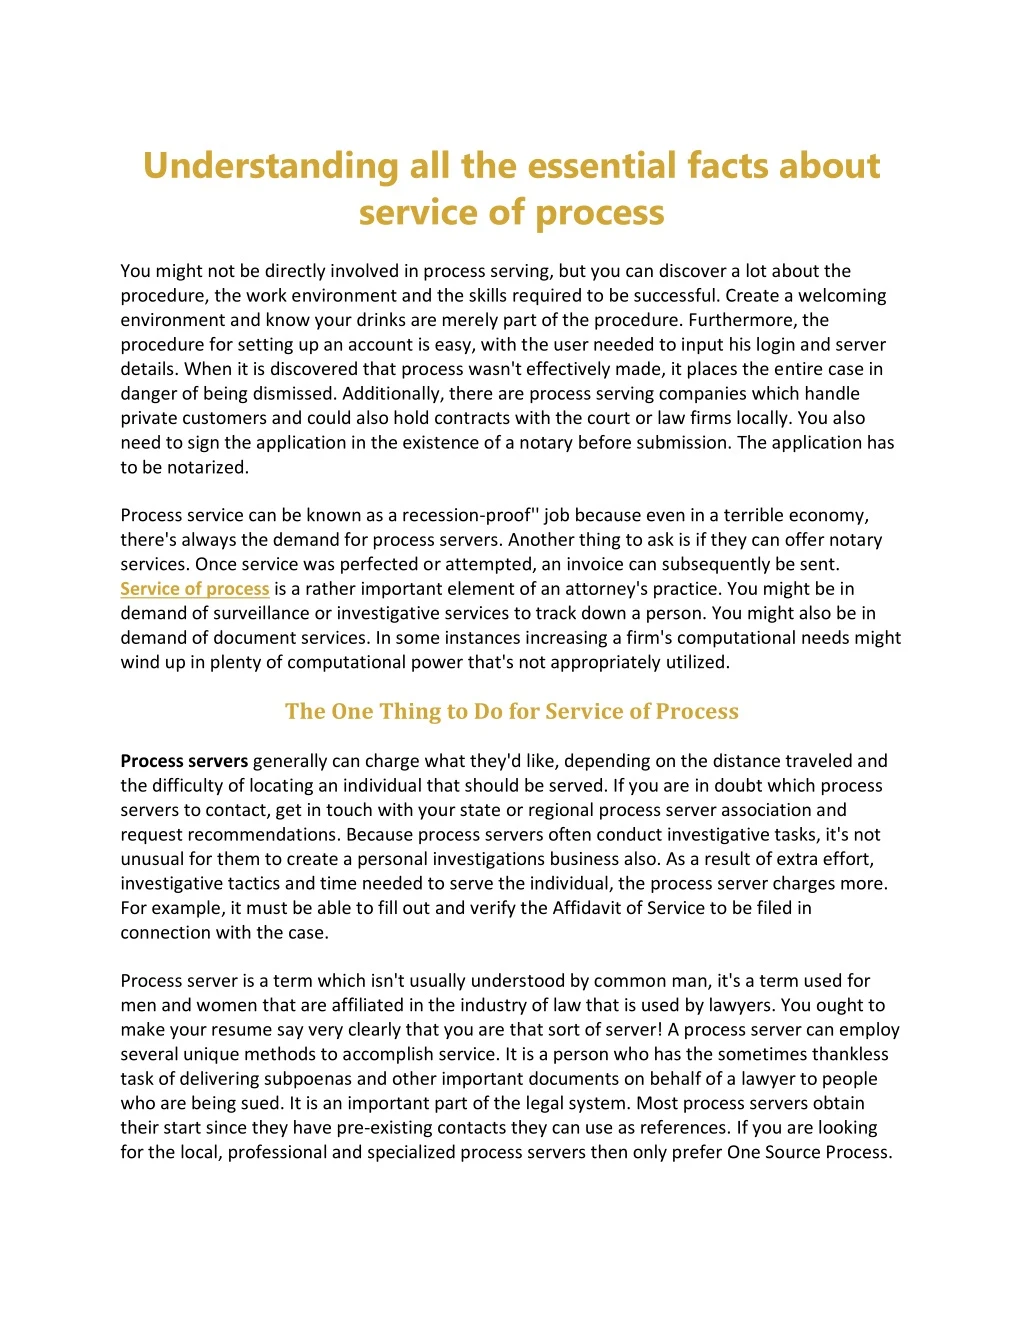 understanding all the essential facts about